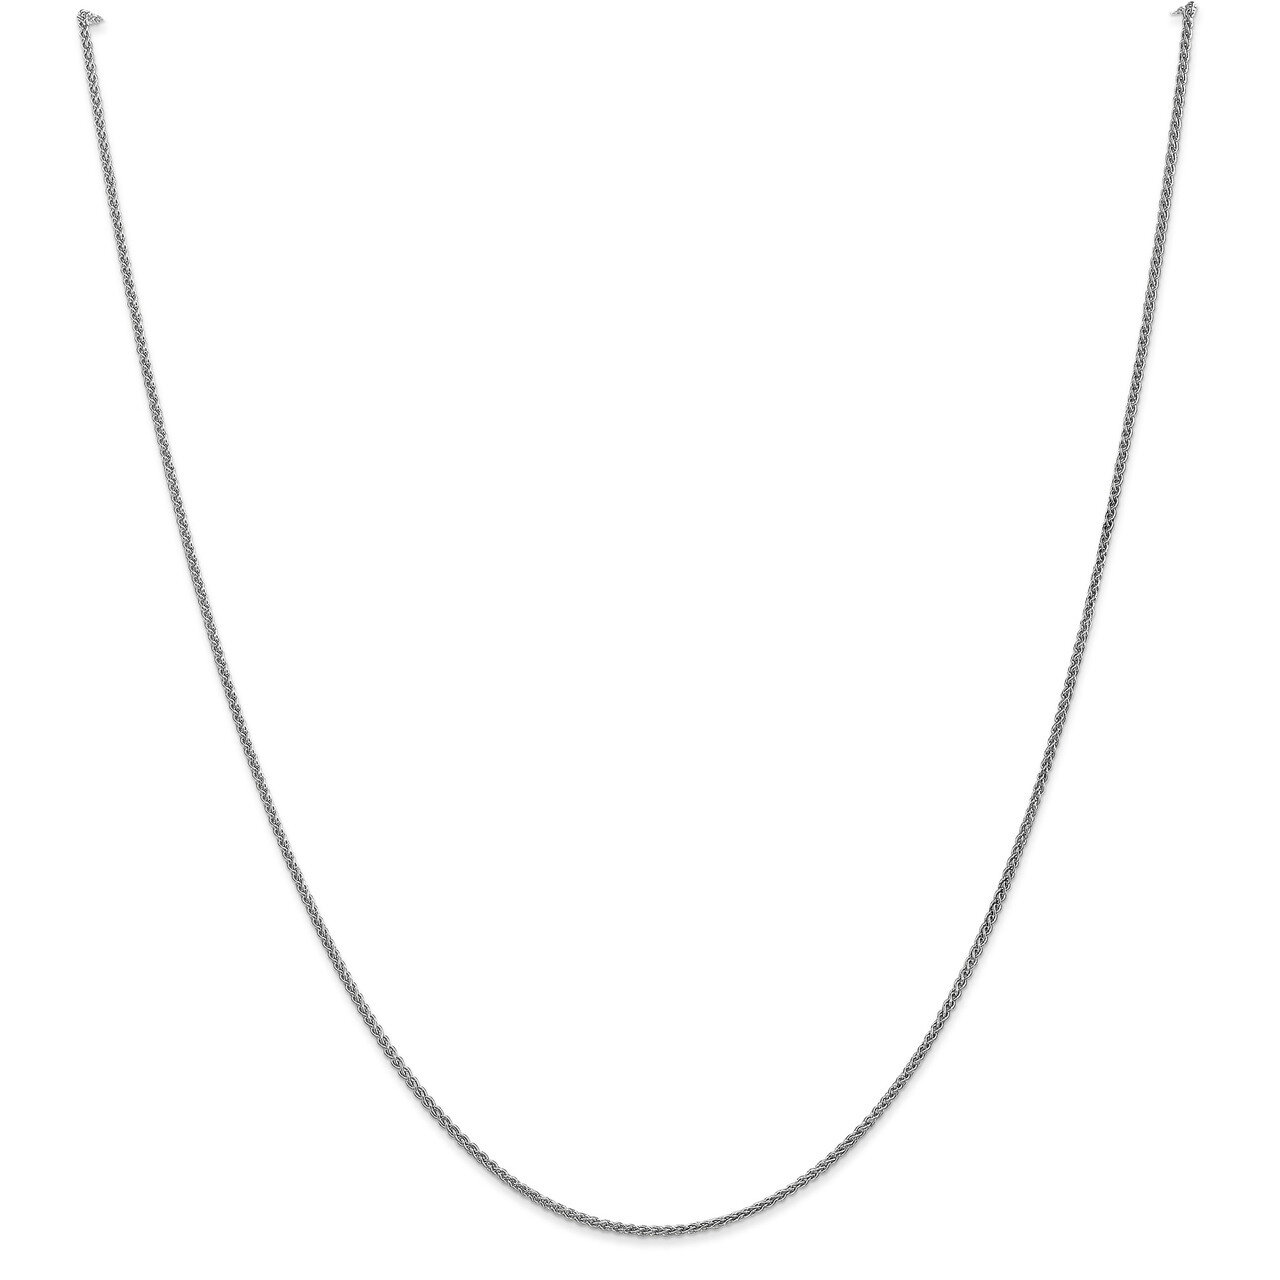 10 Inch 1.25mm Solid Polished Spiga Chain 10k White Gold 10WSP030-10